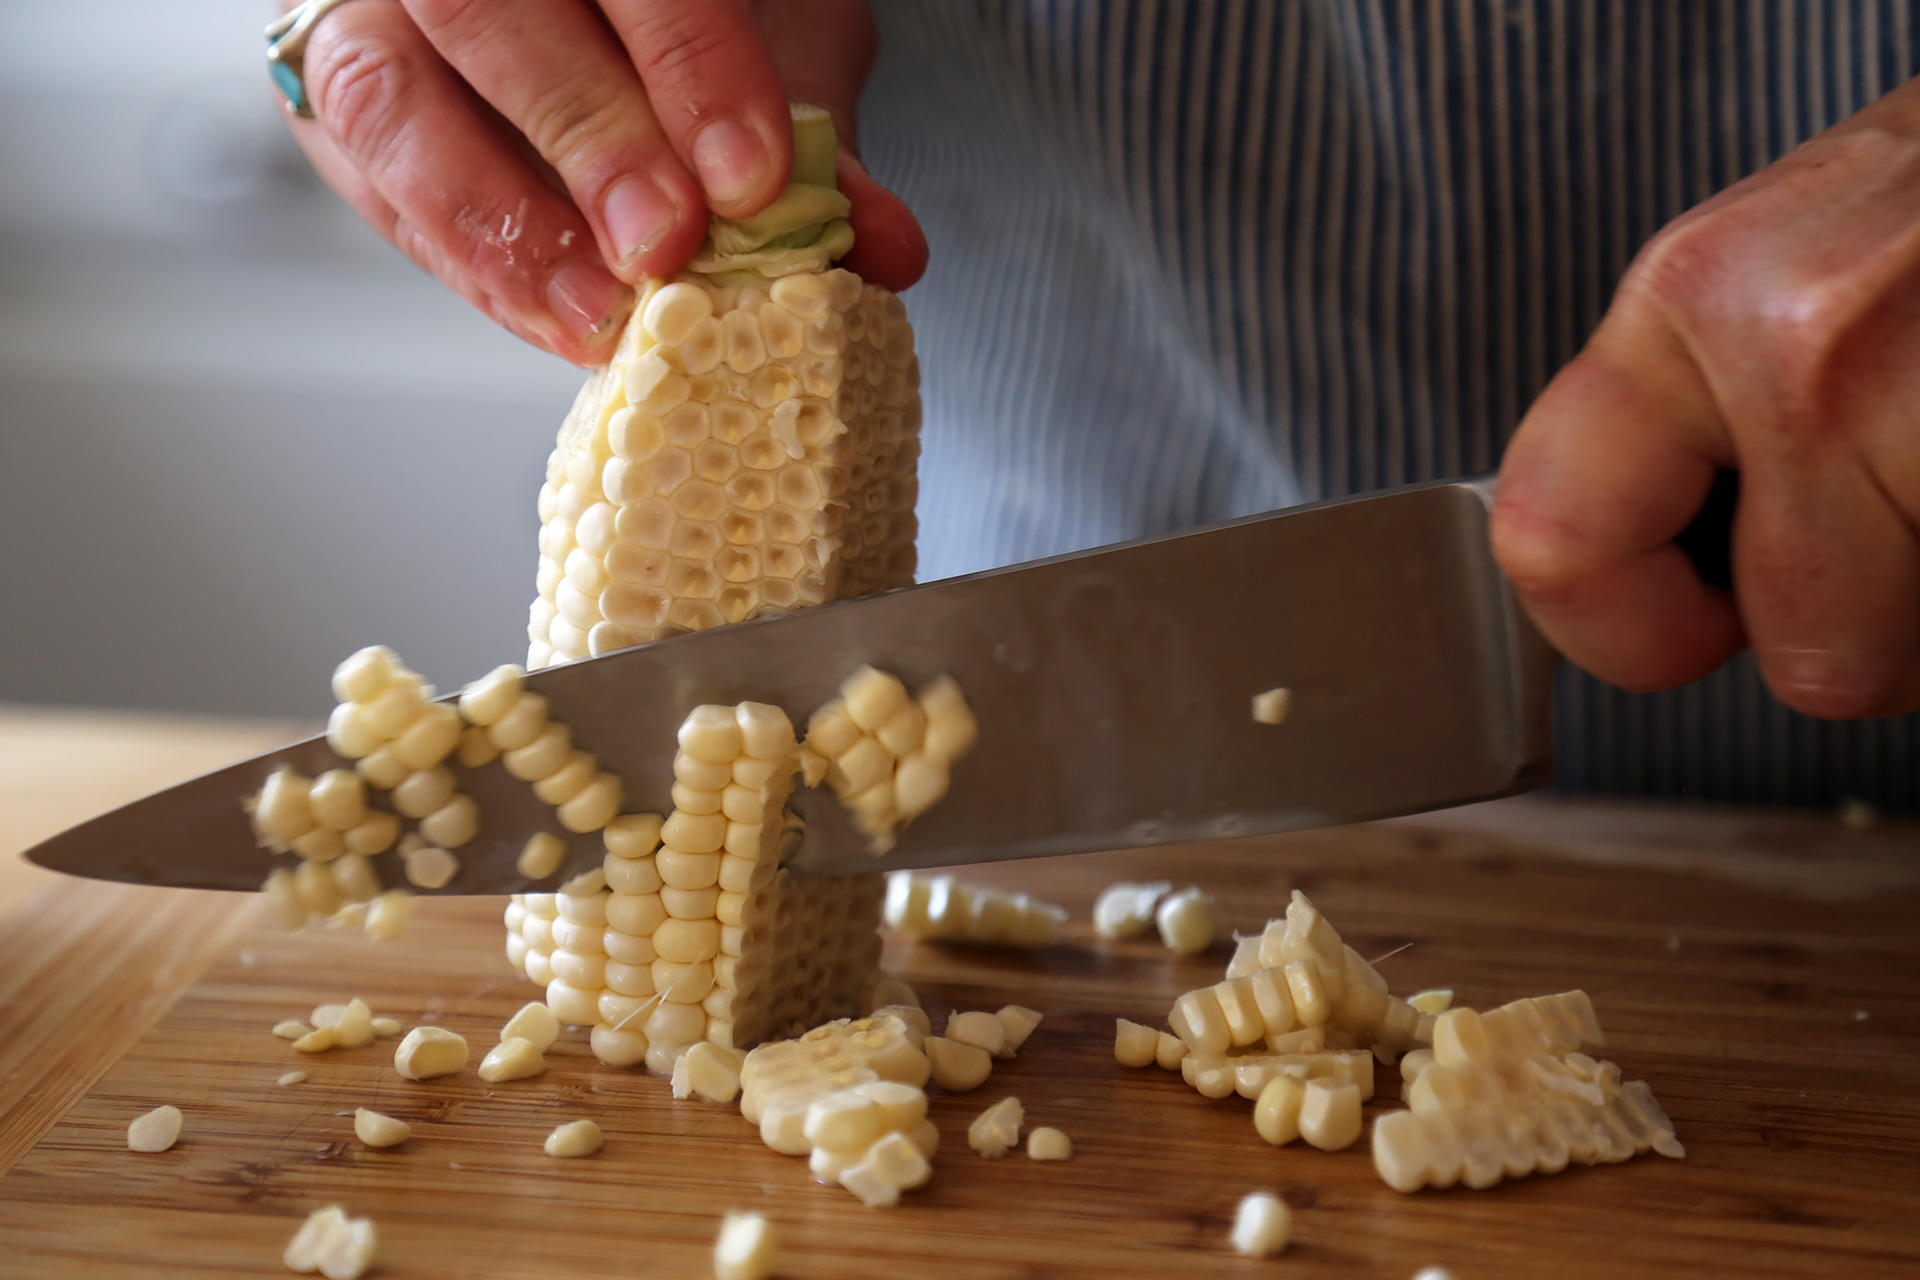 Stand the cob on the flat end, and, using a sharp knife, cut down the side of the cob to remove the kernels.